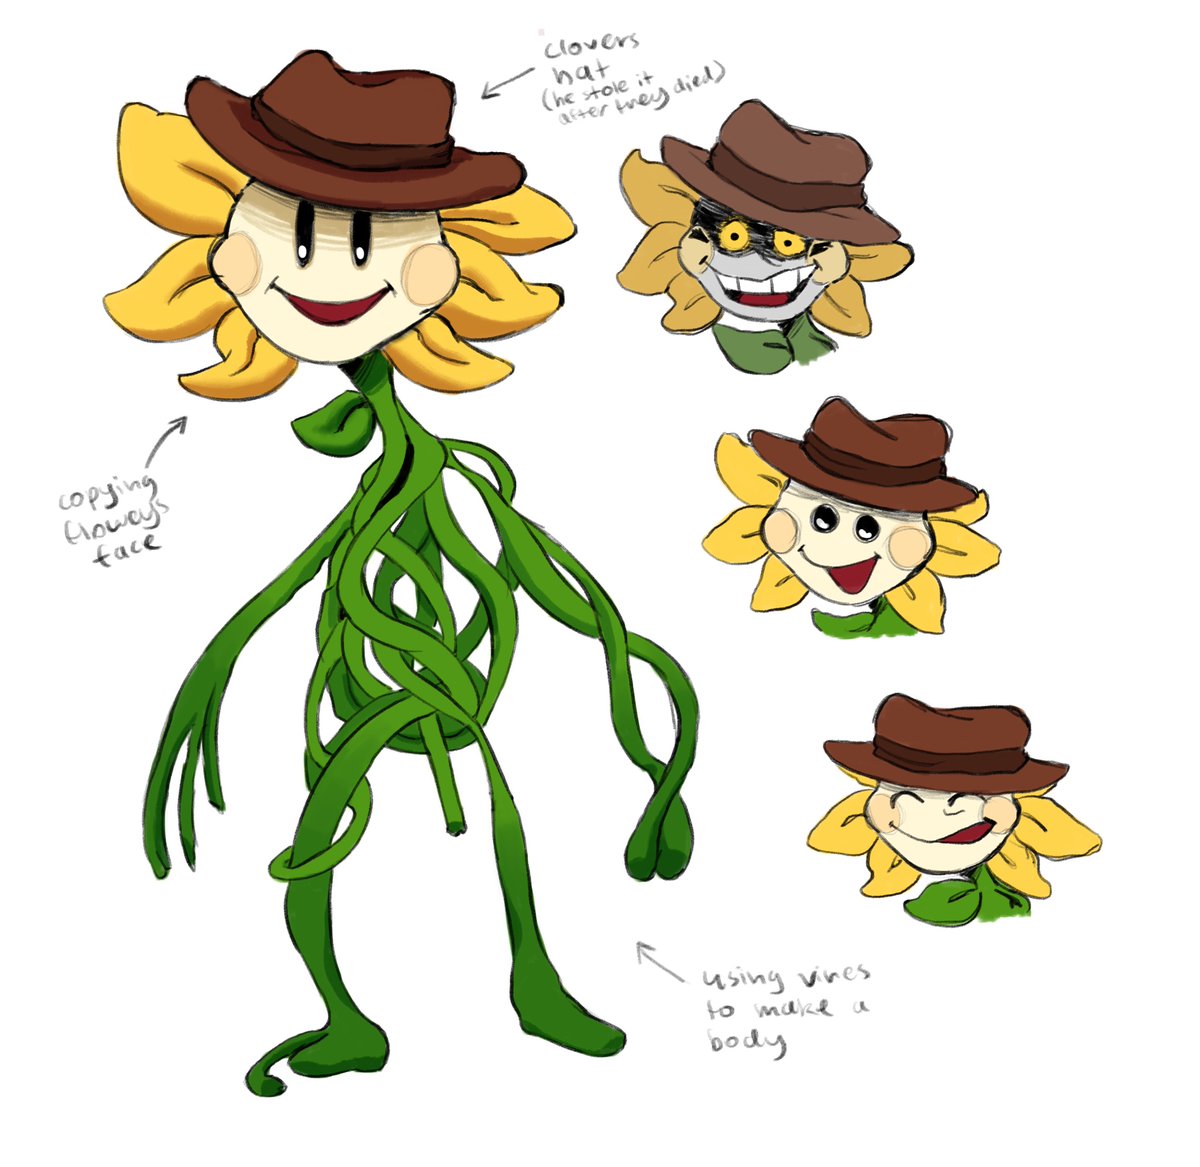 what if petaly was in undertale but he was one of the dt flowers but he had no piles of asriels dust so he’s truly soulless and he looks and acts like he does because flowey was his only reference because he the only one he’s seen whos like him he thinks
#deltarunefanart